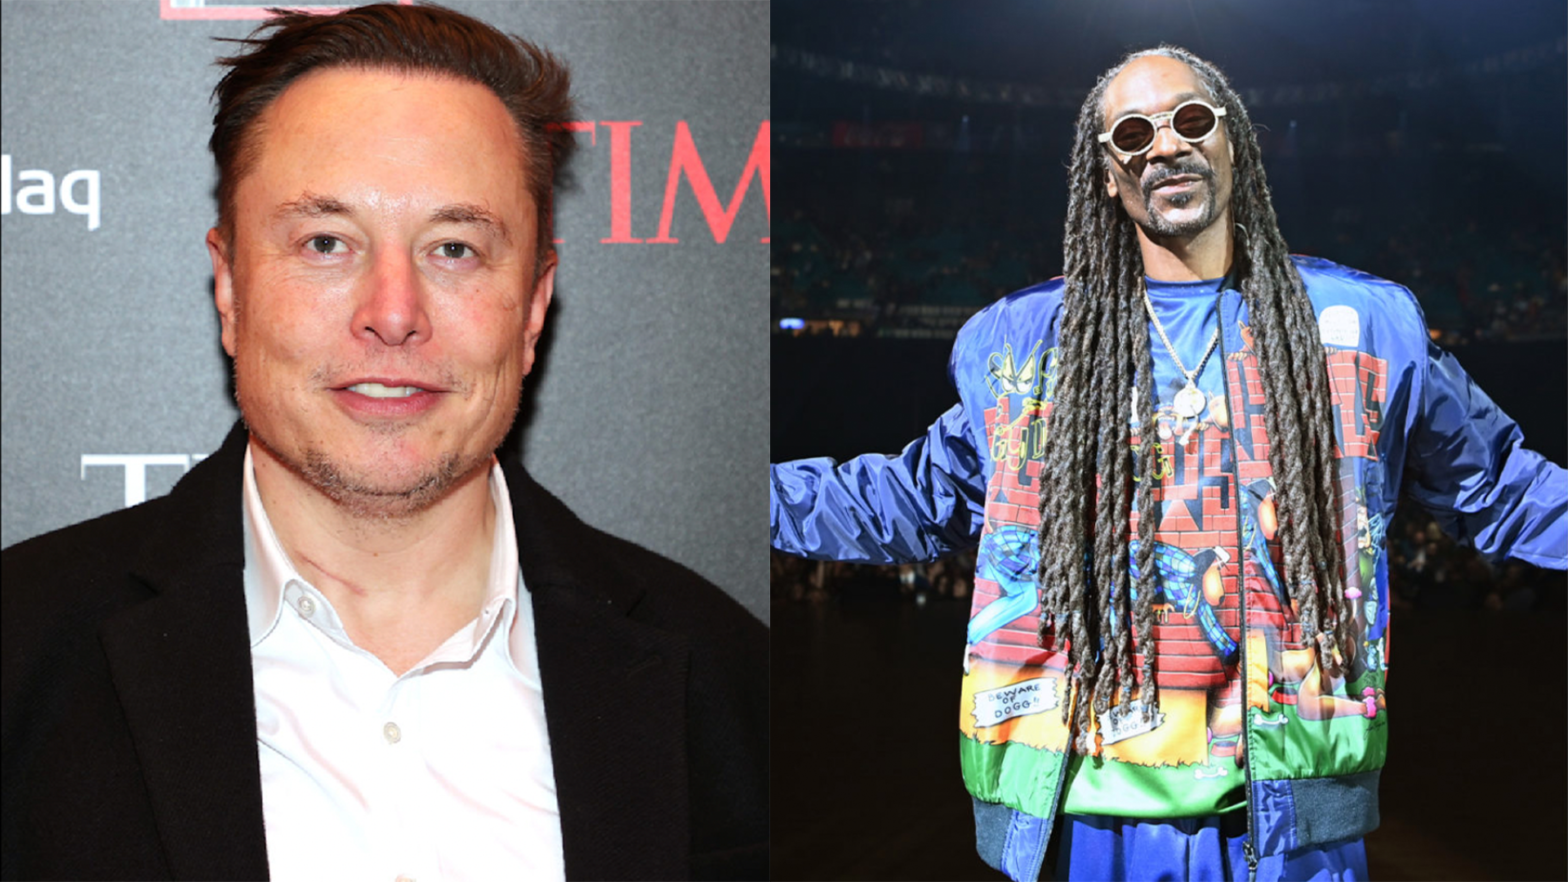 Elon Musk Reacts To Snoop Dogg's Interest In Buying Twitter And Snoop Replies: 'You Bring The Fire, I'll Bring The Smoke'